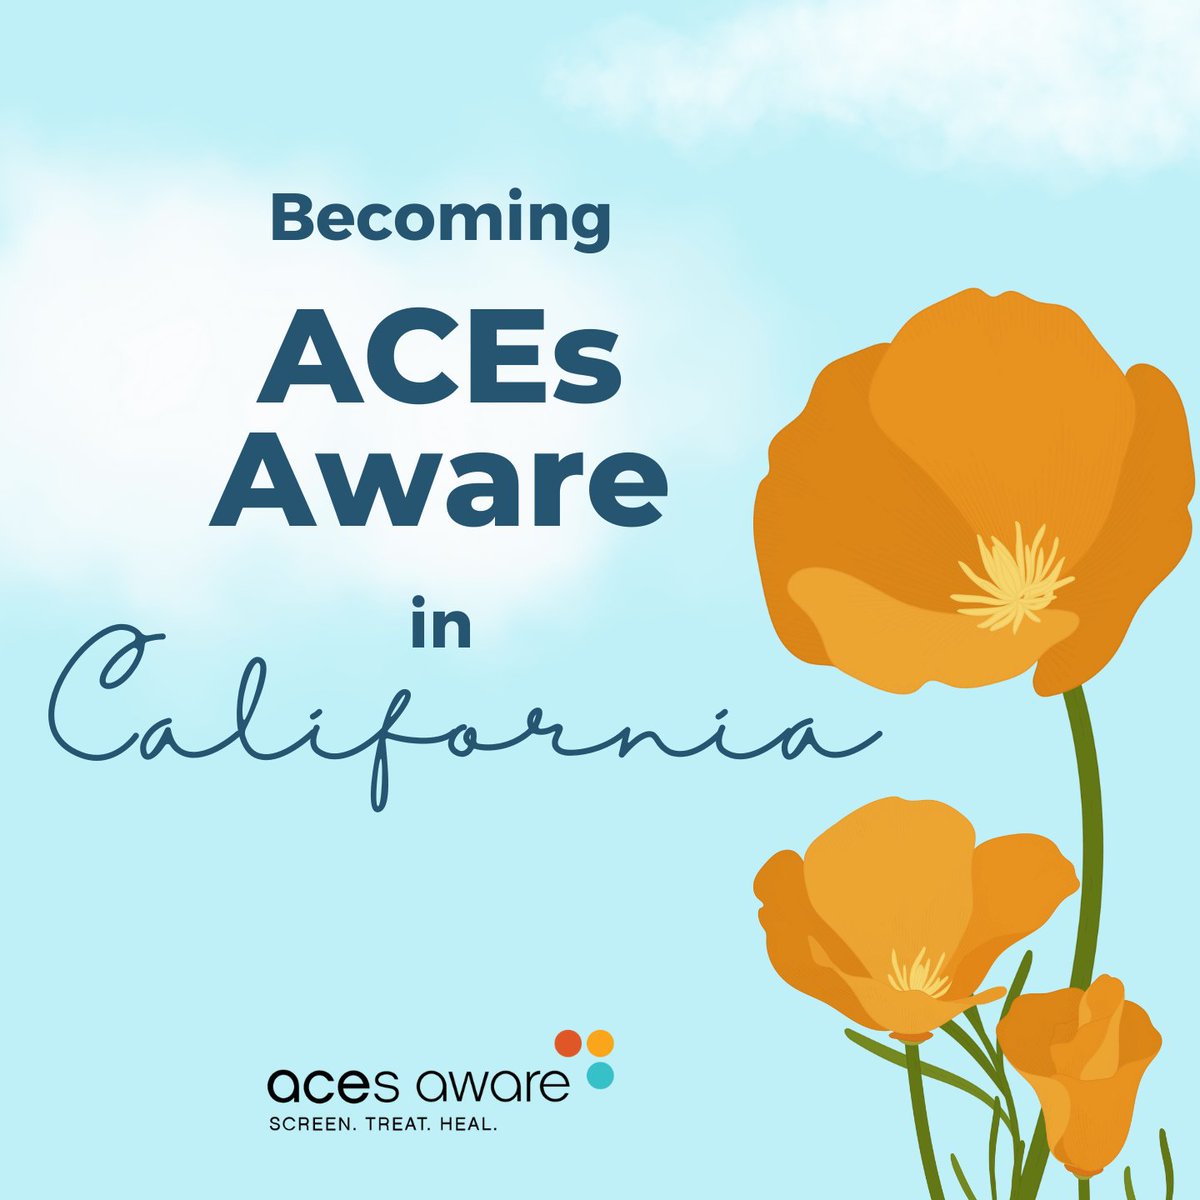 All health care teams, community workers, and educators in settings where children, adults, and families receive health care or supportive community services can benefit from taking the Becoming ACEs Aware in California training. Take the training today: bit.ly/3iFbvyY